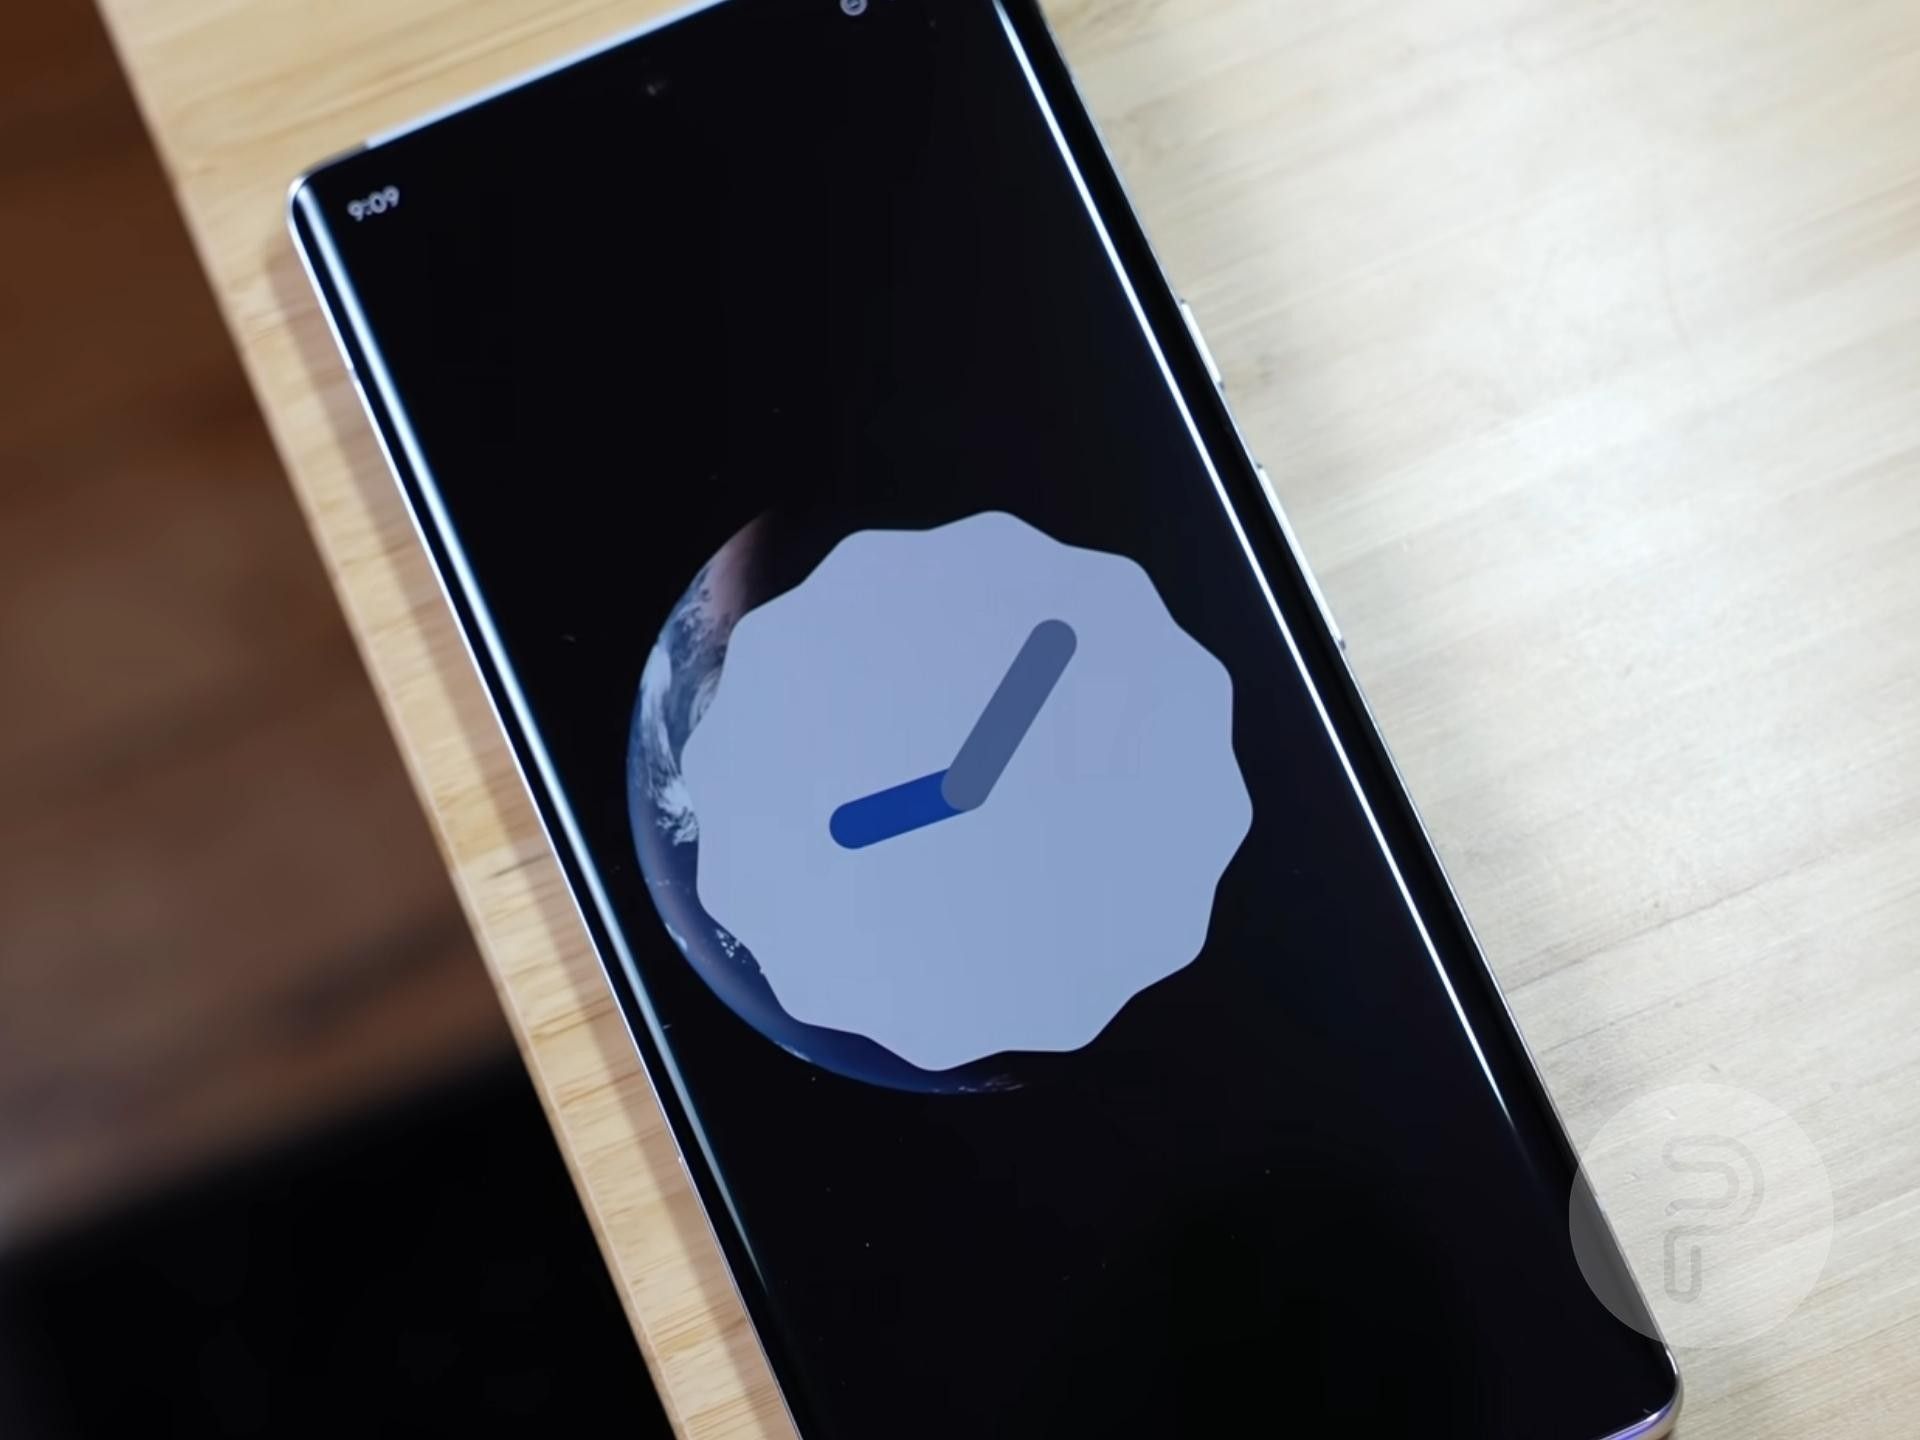 Display of Pixel 6 Pro showing the Android 12 Easter Egg